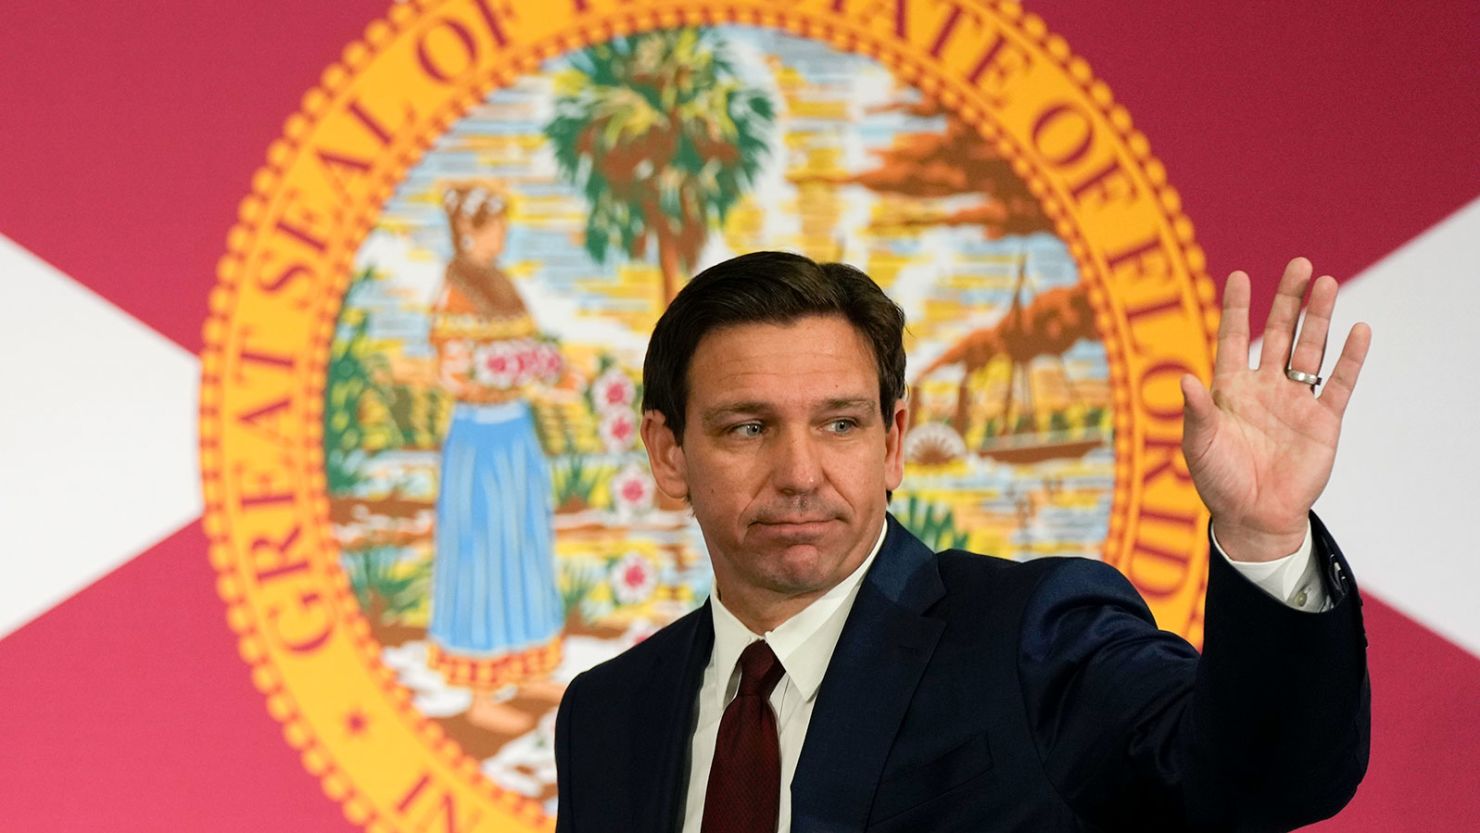 Florida Governor Ron DeSantis waves as he leaves after signing several bills related to public education and teacher pay, at a press conference in Miami, May 9, 2023.